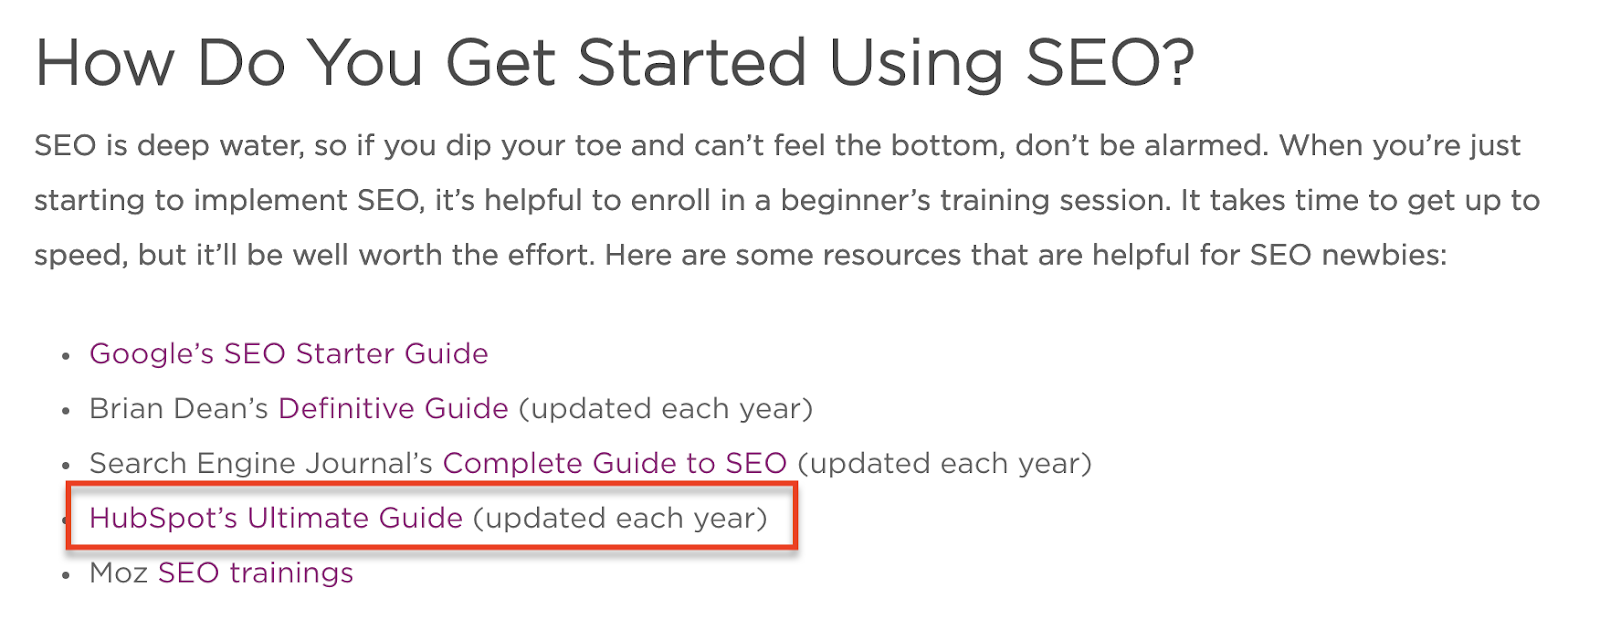 Article on "how to get started using seo" featuring hubspot's ultimate guide to se